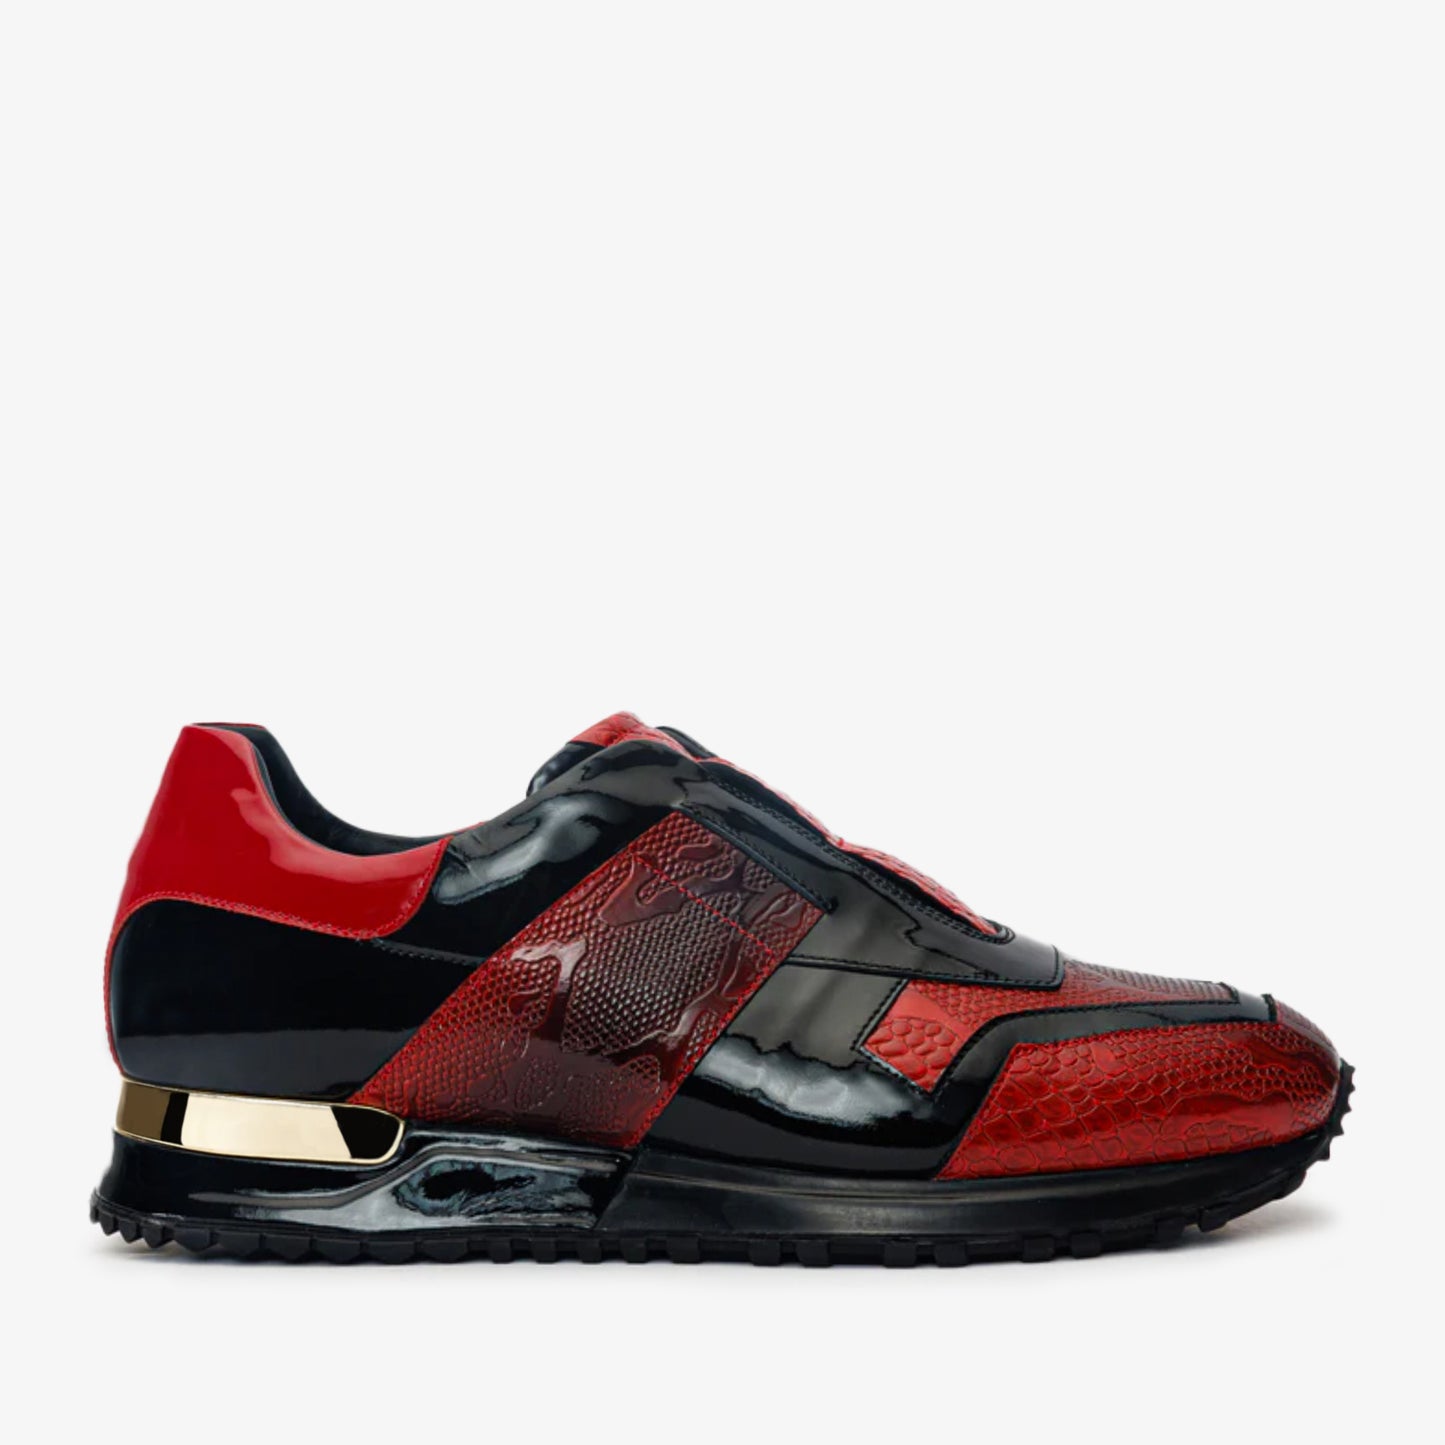 The Milano Snk Red Leather Men Sneaker